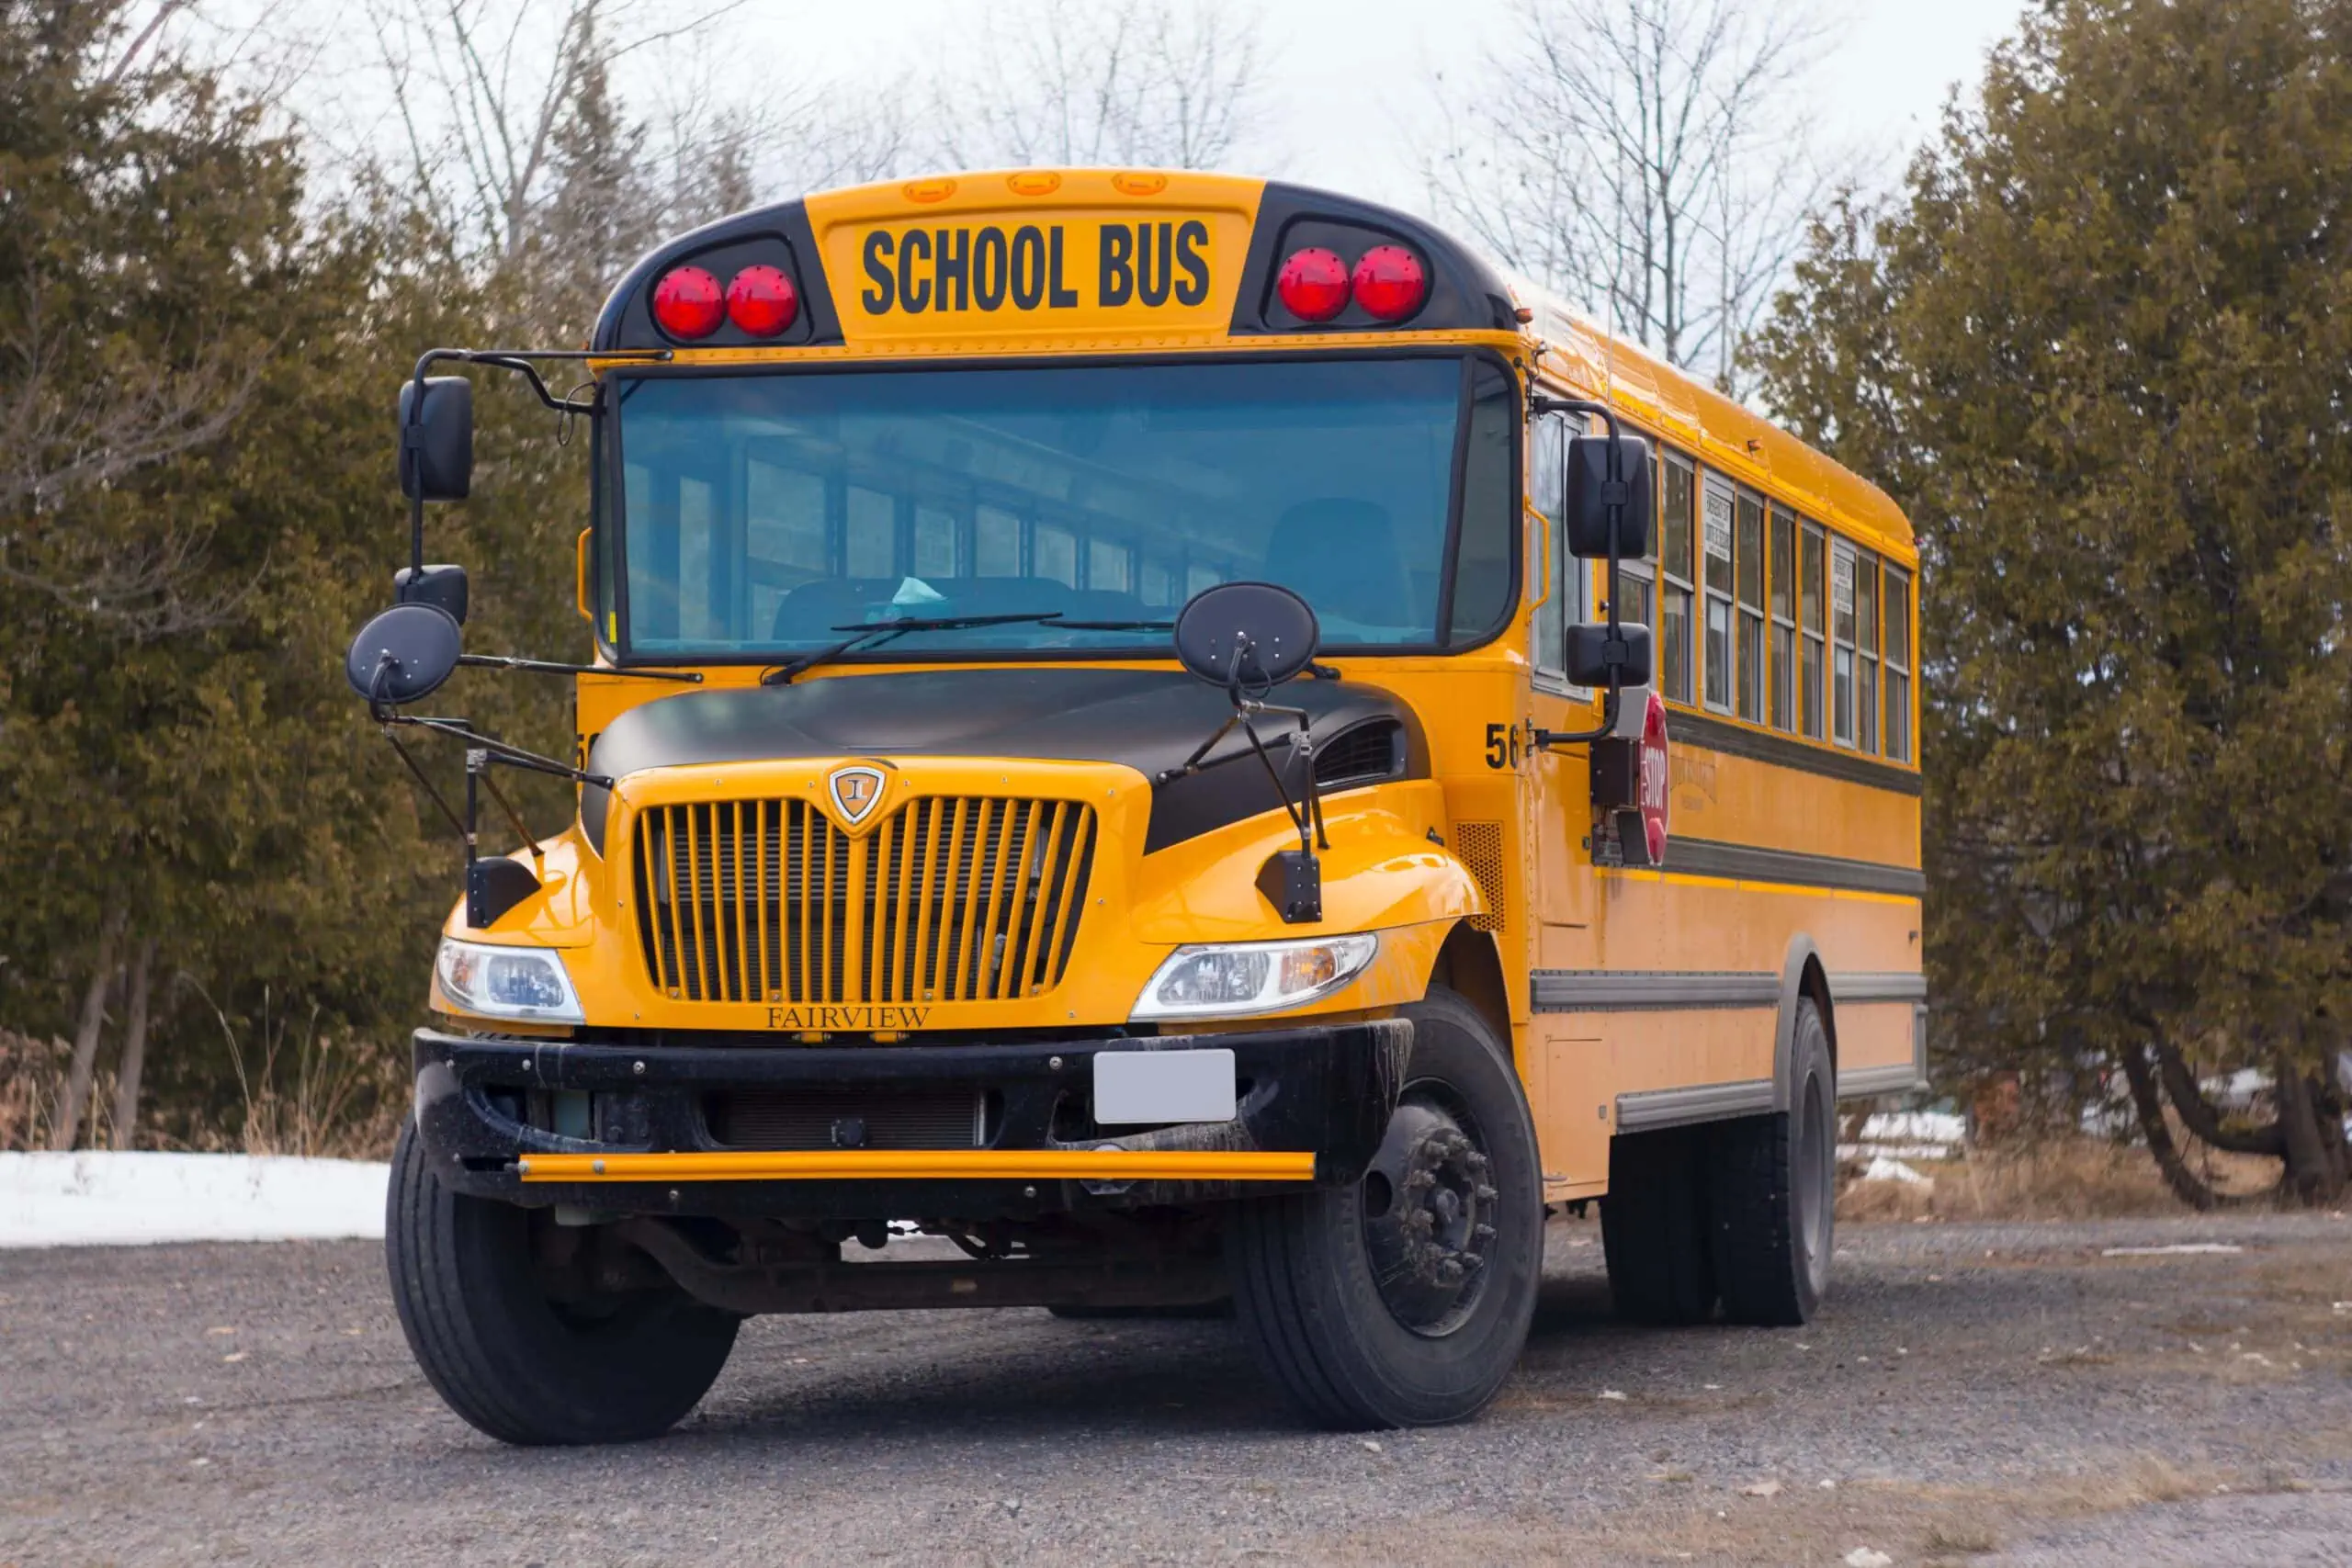 Bus equipped with school bus cameras